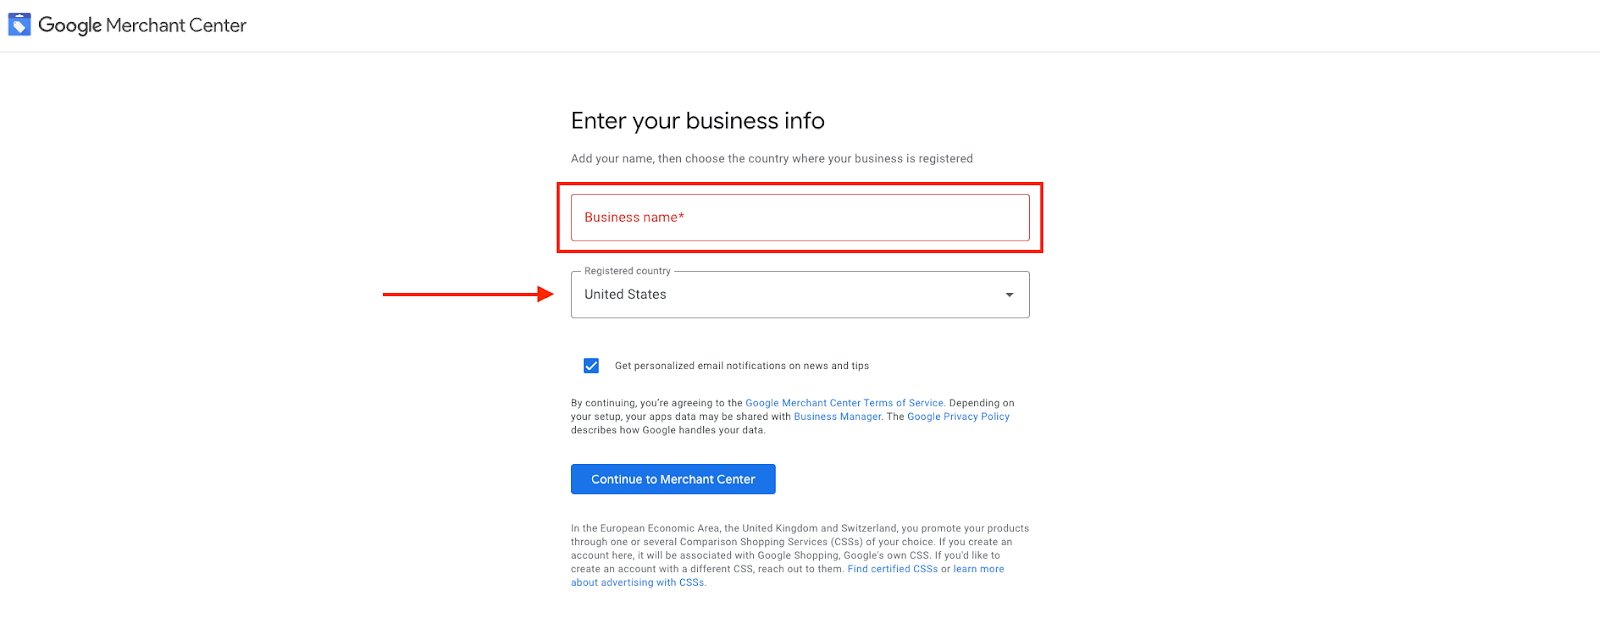 Step in the Google Merhcant process to enter business info. 